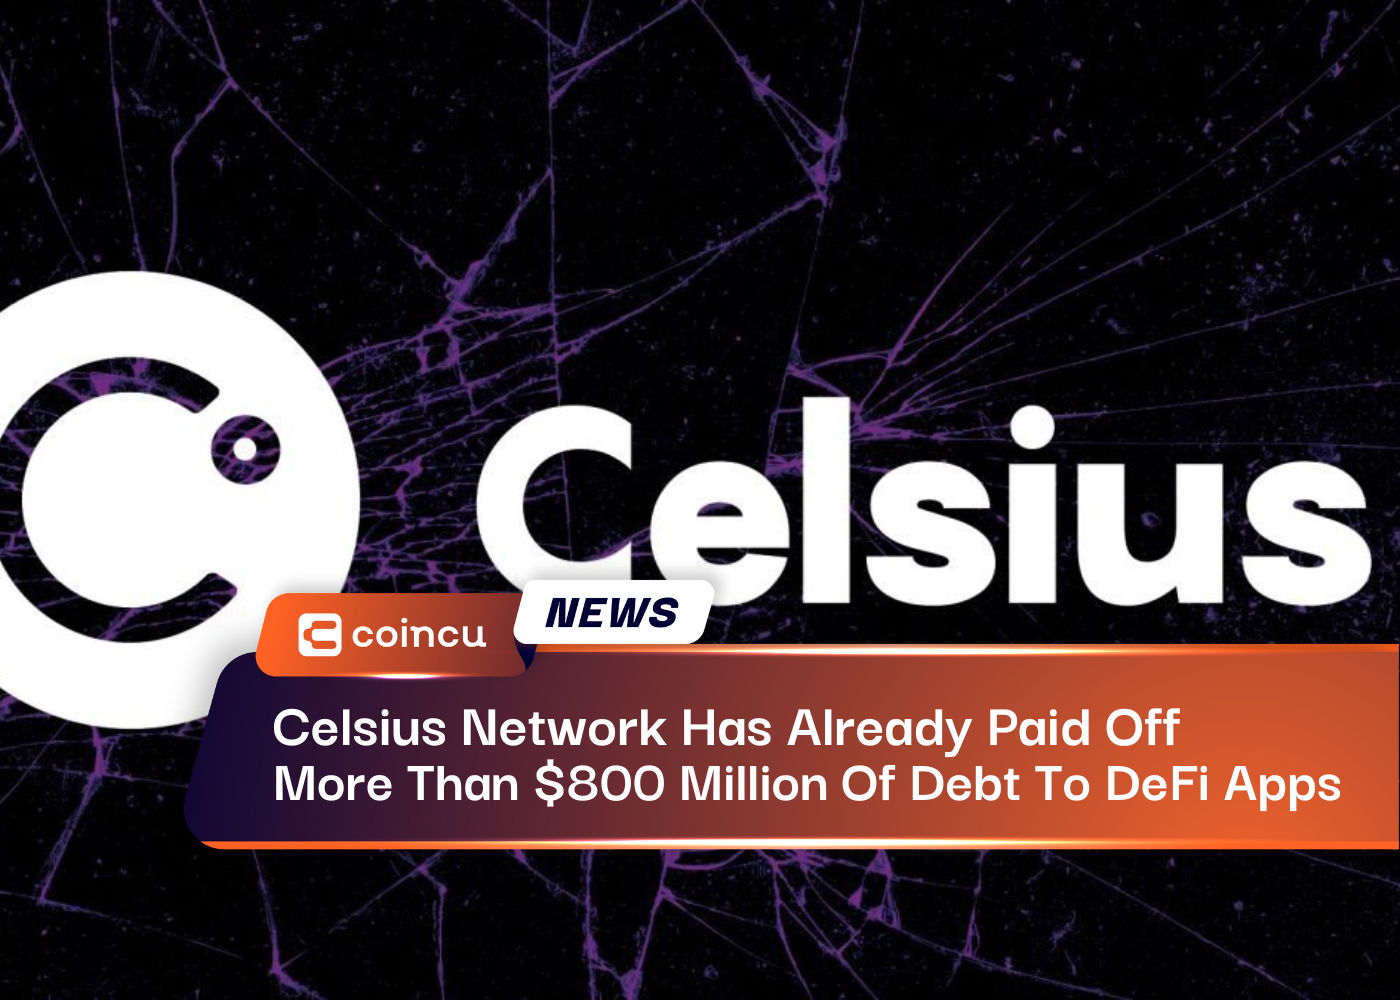 Celsius Network Has Already Paid Off